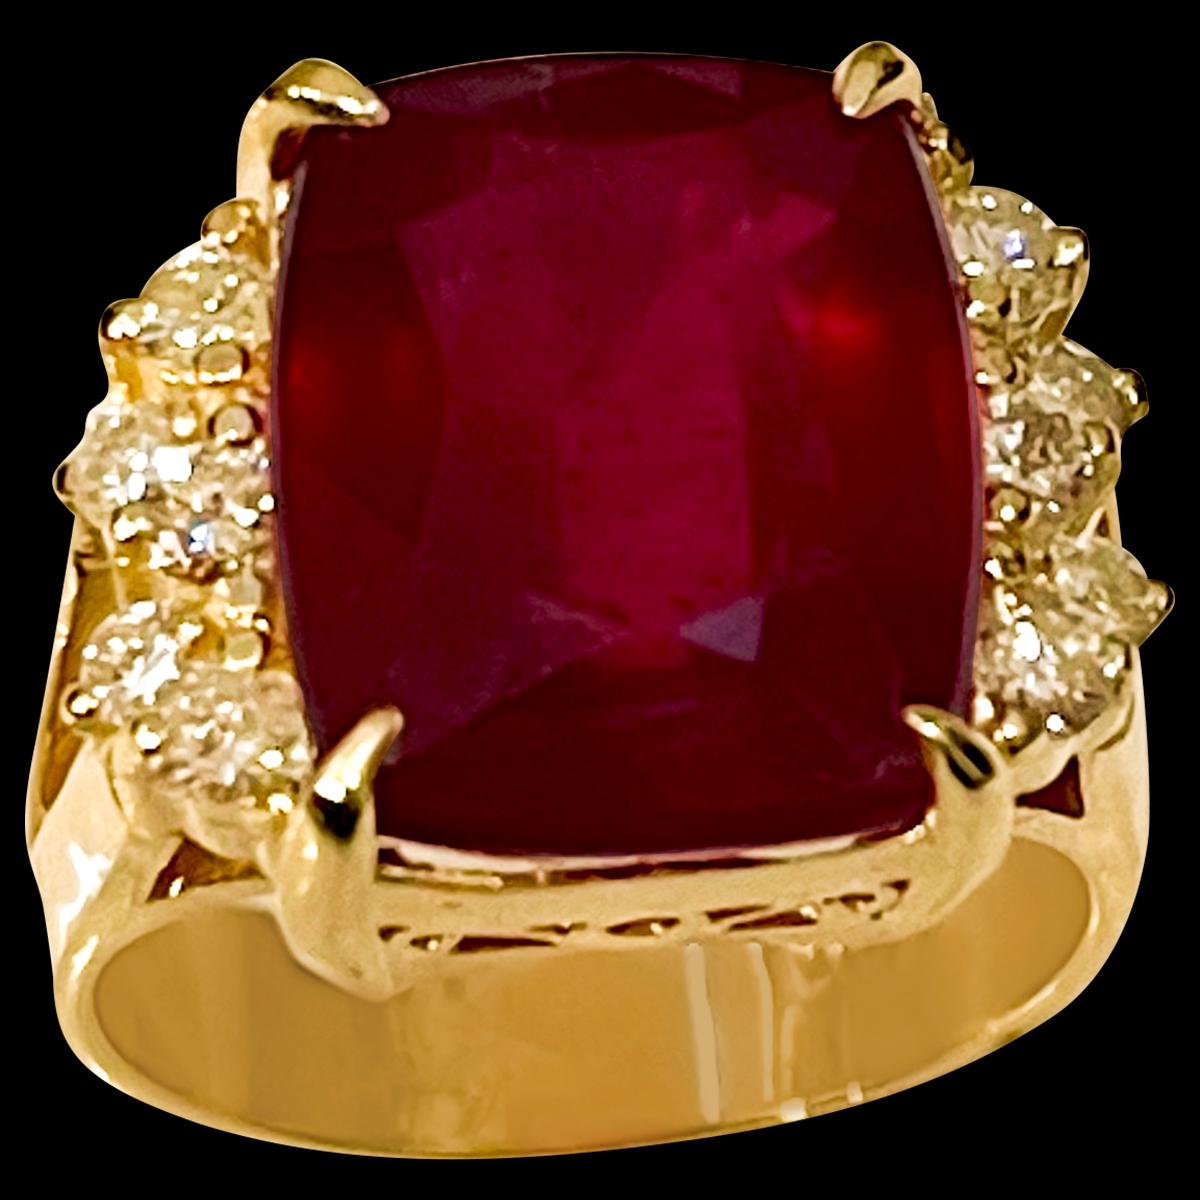 7 Carat Treated  Cushion Shape Ruby & Diamond 14 Karat Yellow Gold Cocktail Ring size 6
 prong set
14 K Yellow Gold: 8.7  gram
Stamped 14K
Ring Size 6 ( can be altered for no charge )
Large approximately 7  carat  cushion shape ruby Treated